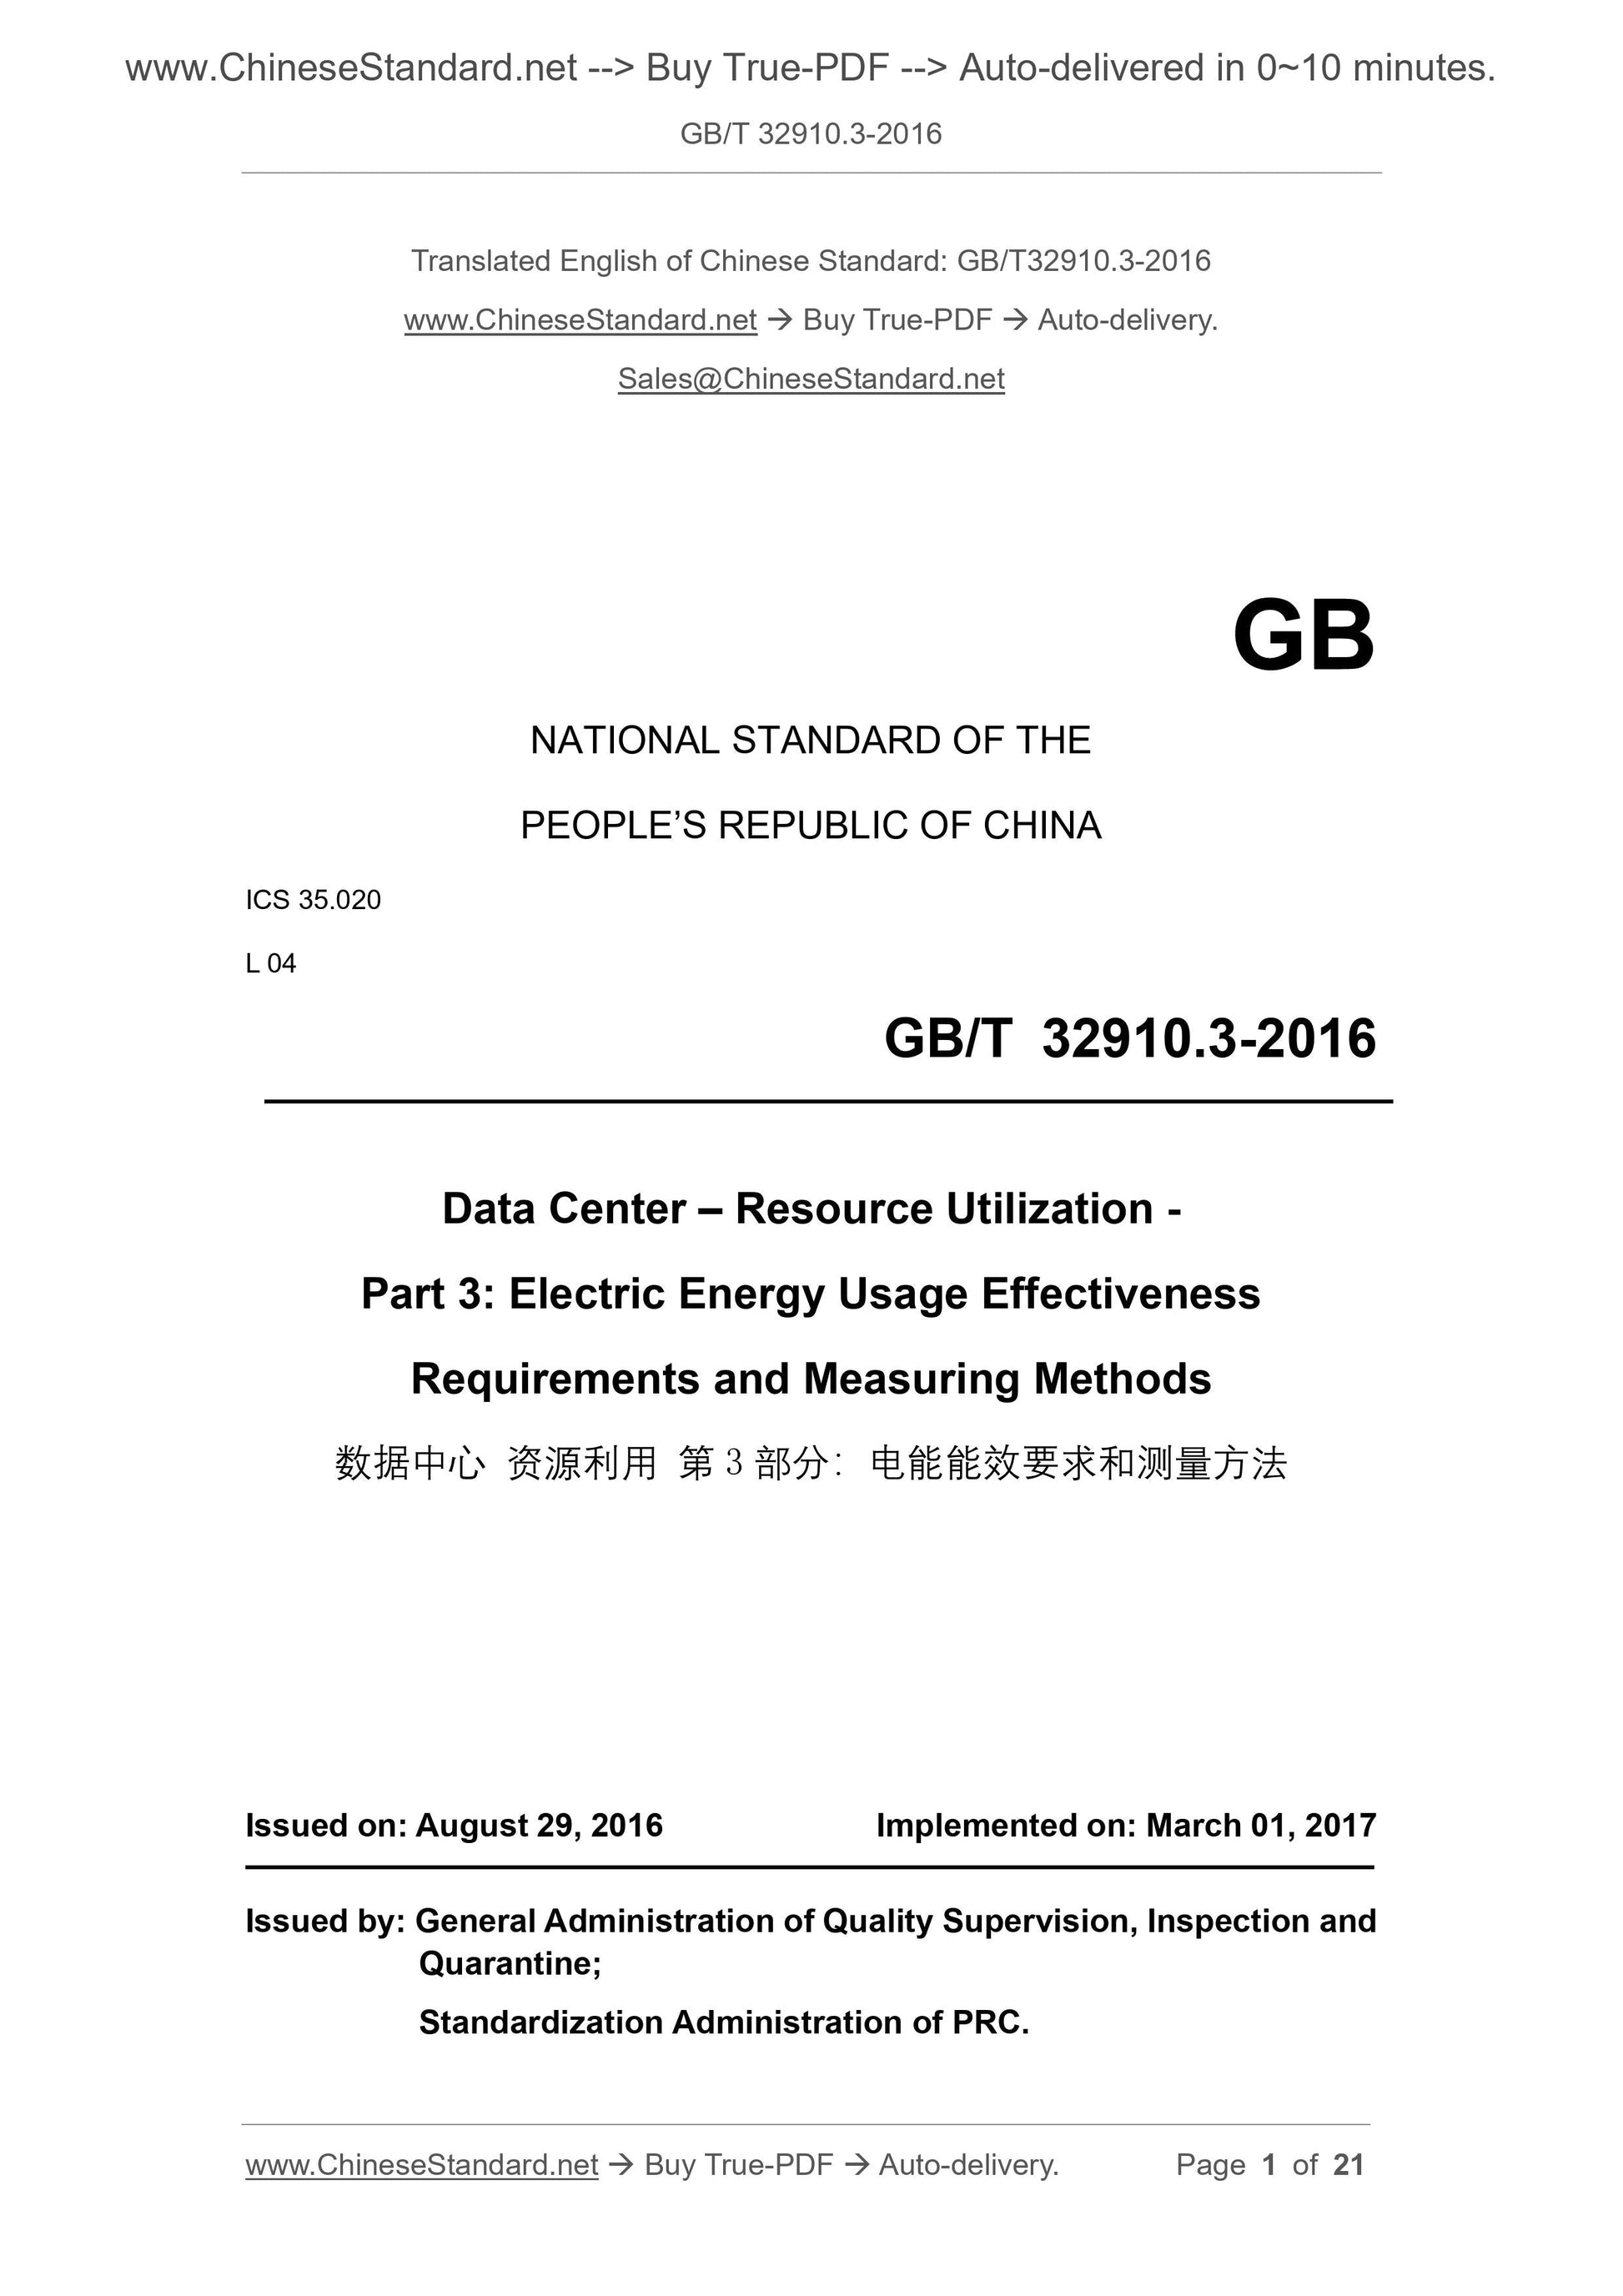 GB/T 32910.3-2016 Page 1